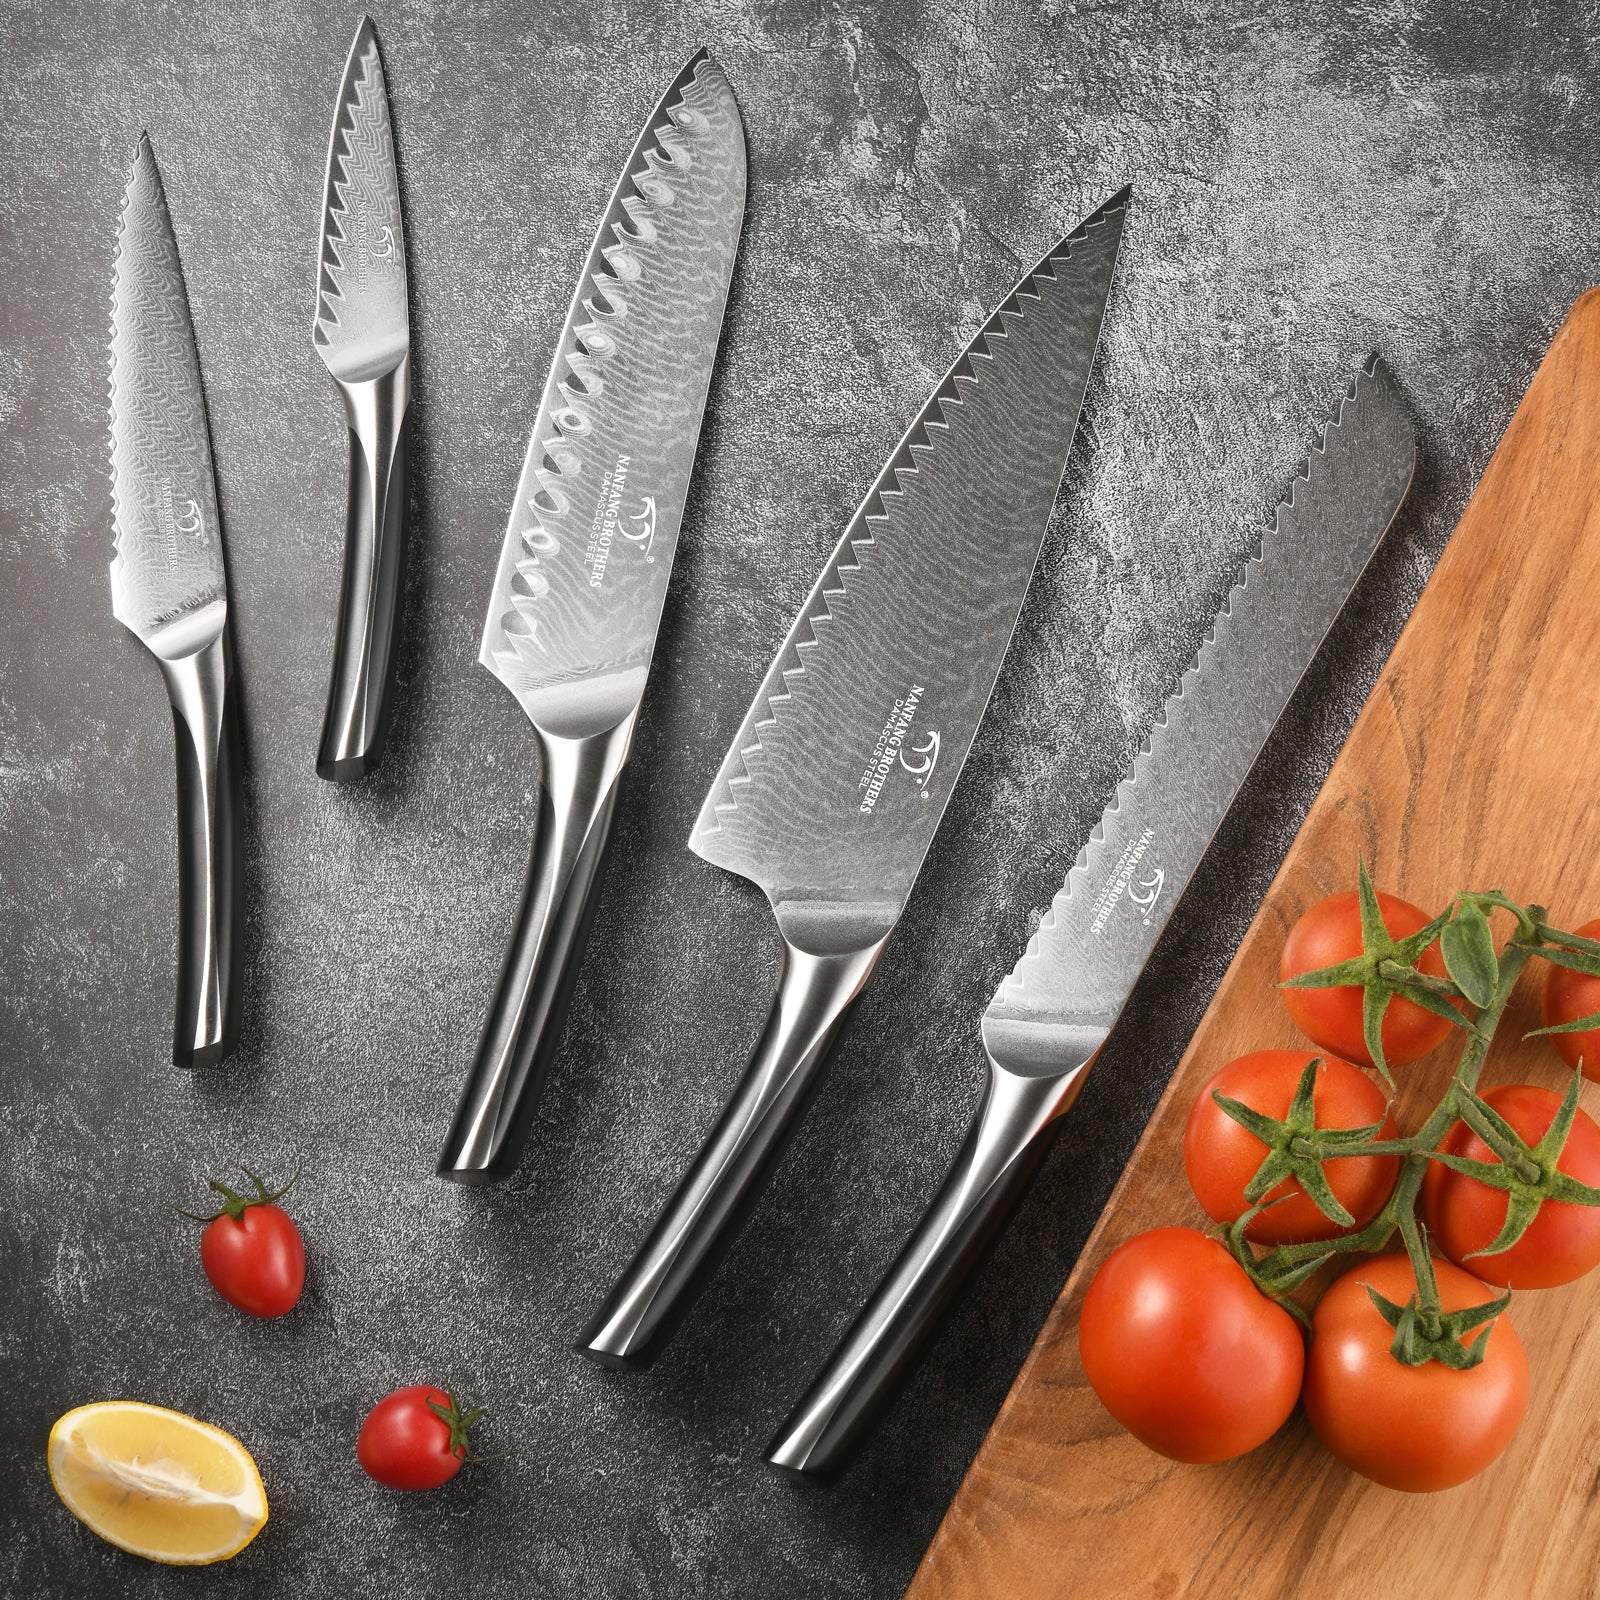 How to choose a good quality kitchen knife?